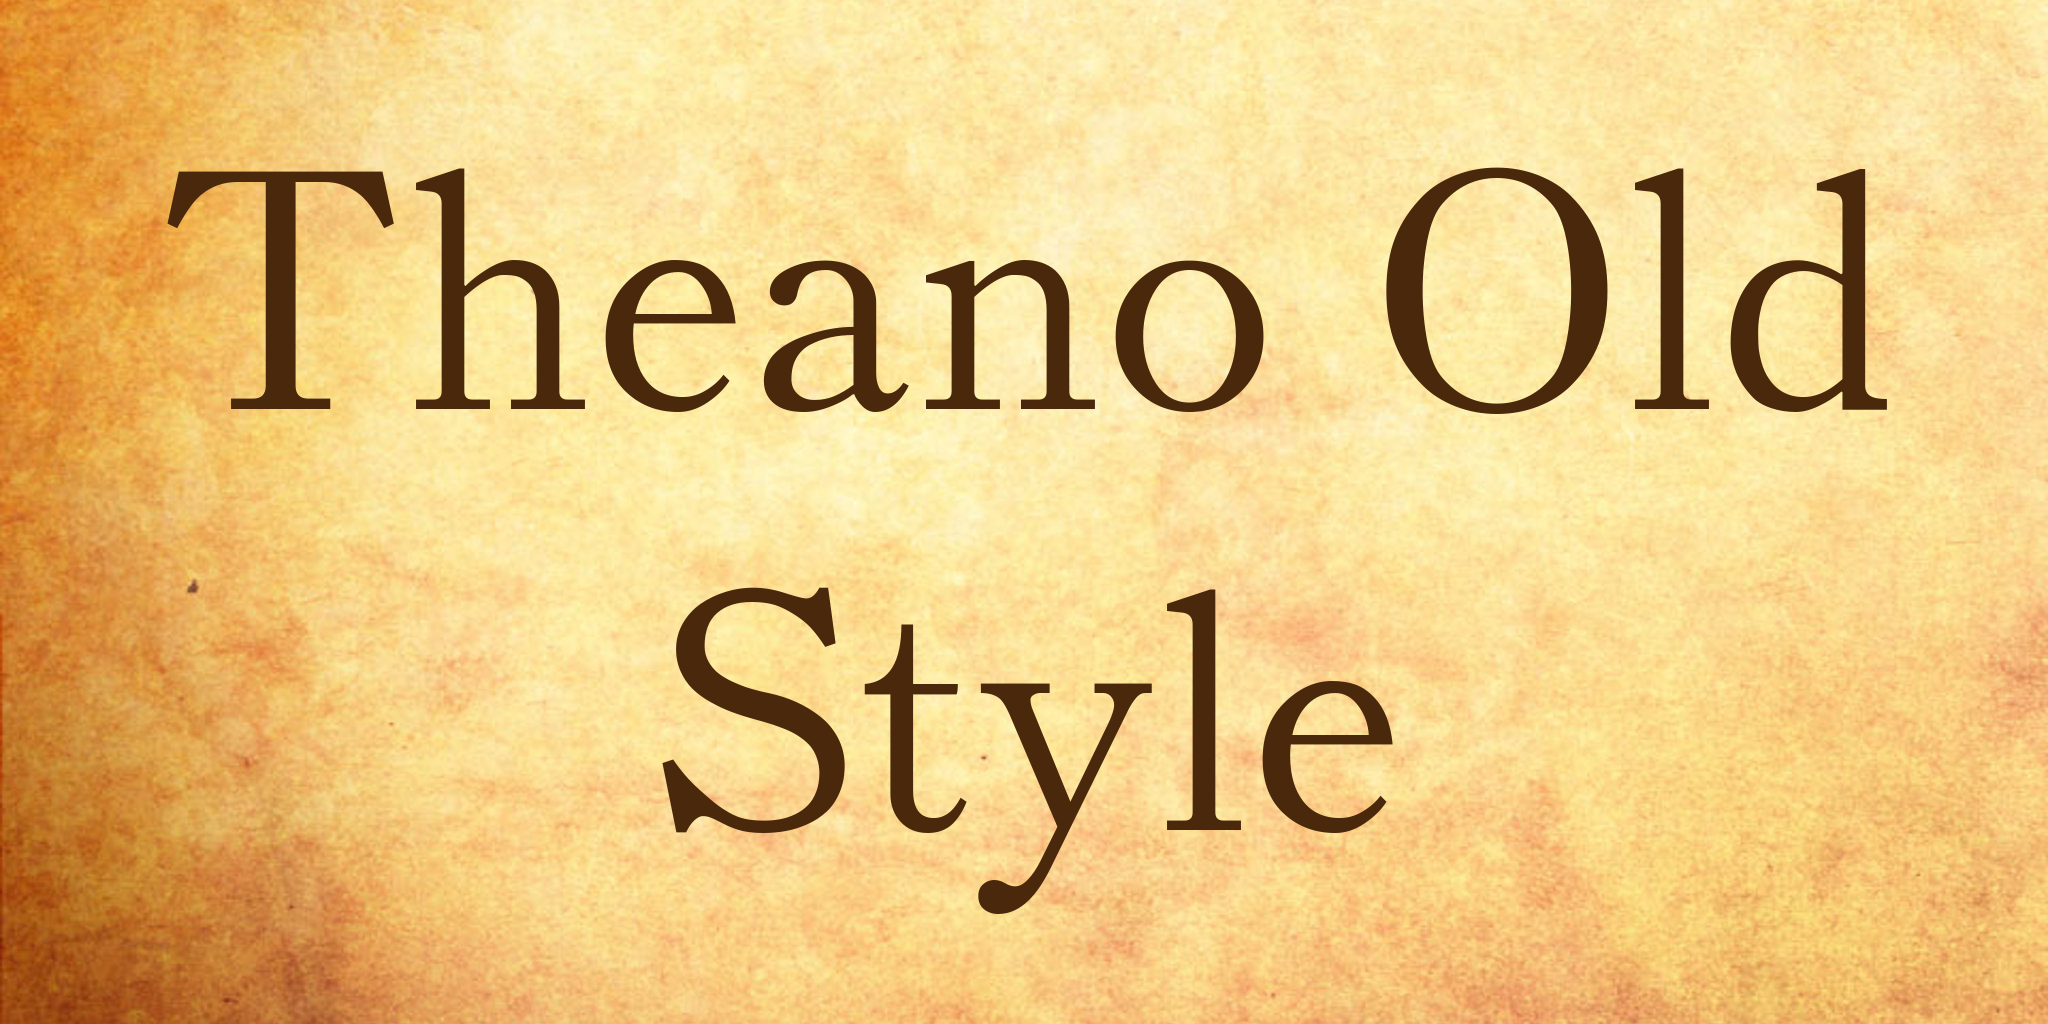 Theano Old Style